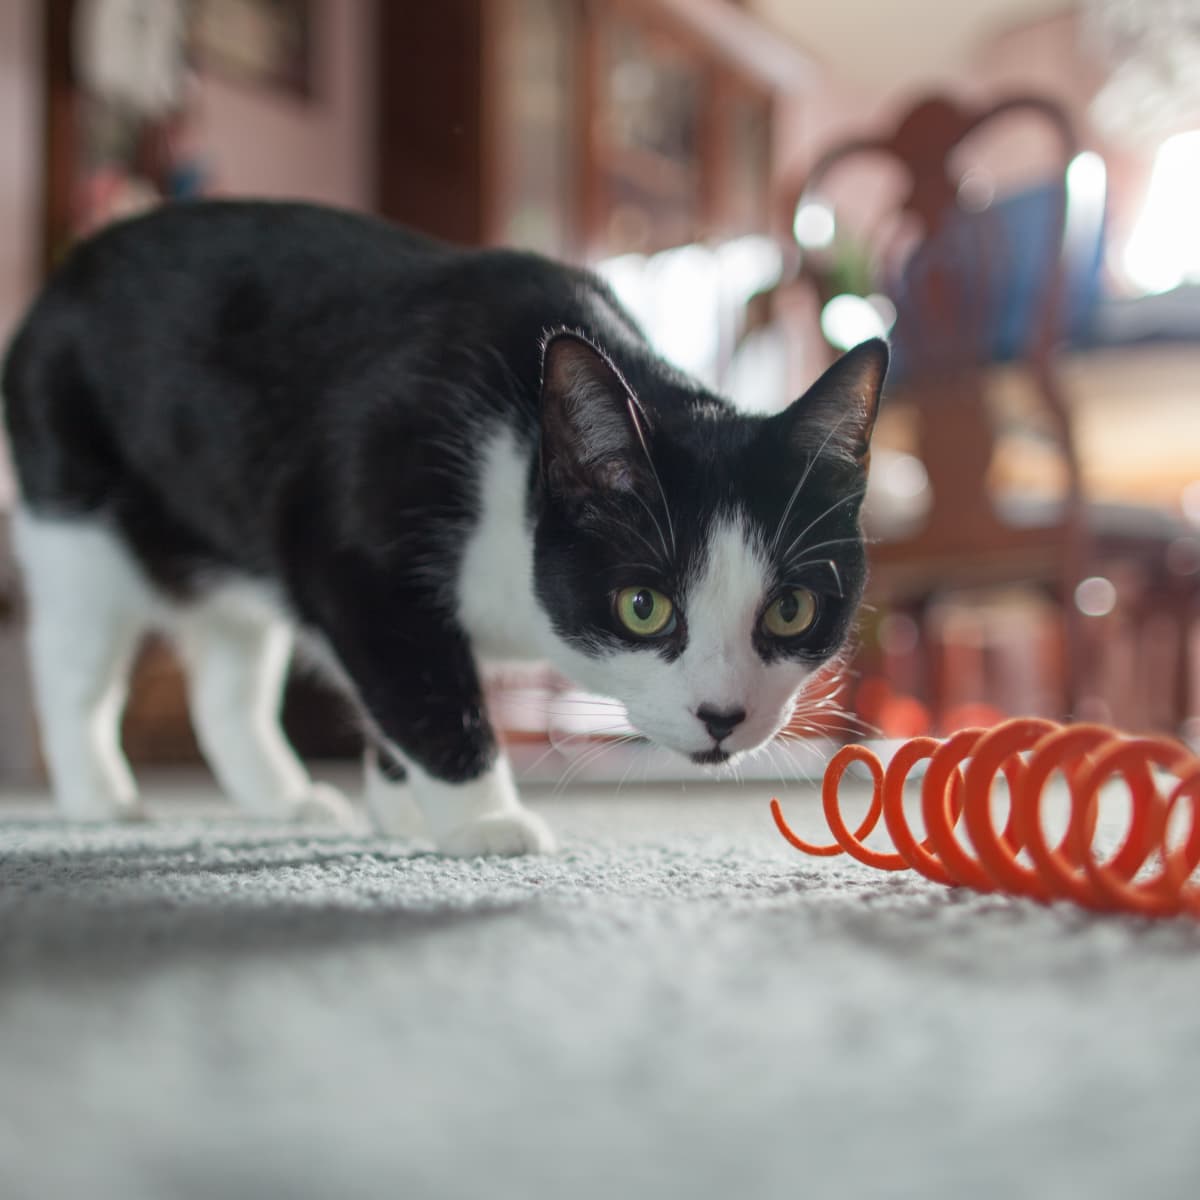 How to Make Your Own Homemade Cat Toys From Household Items - PetHelpful